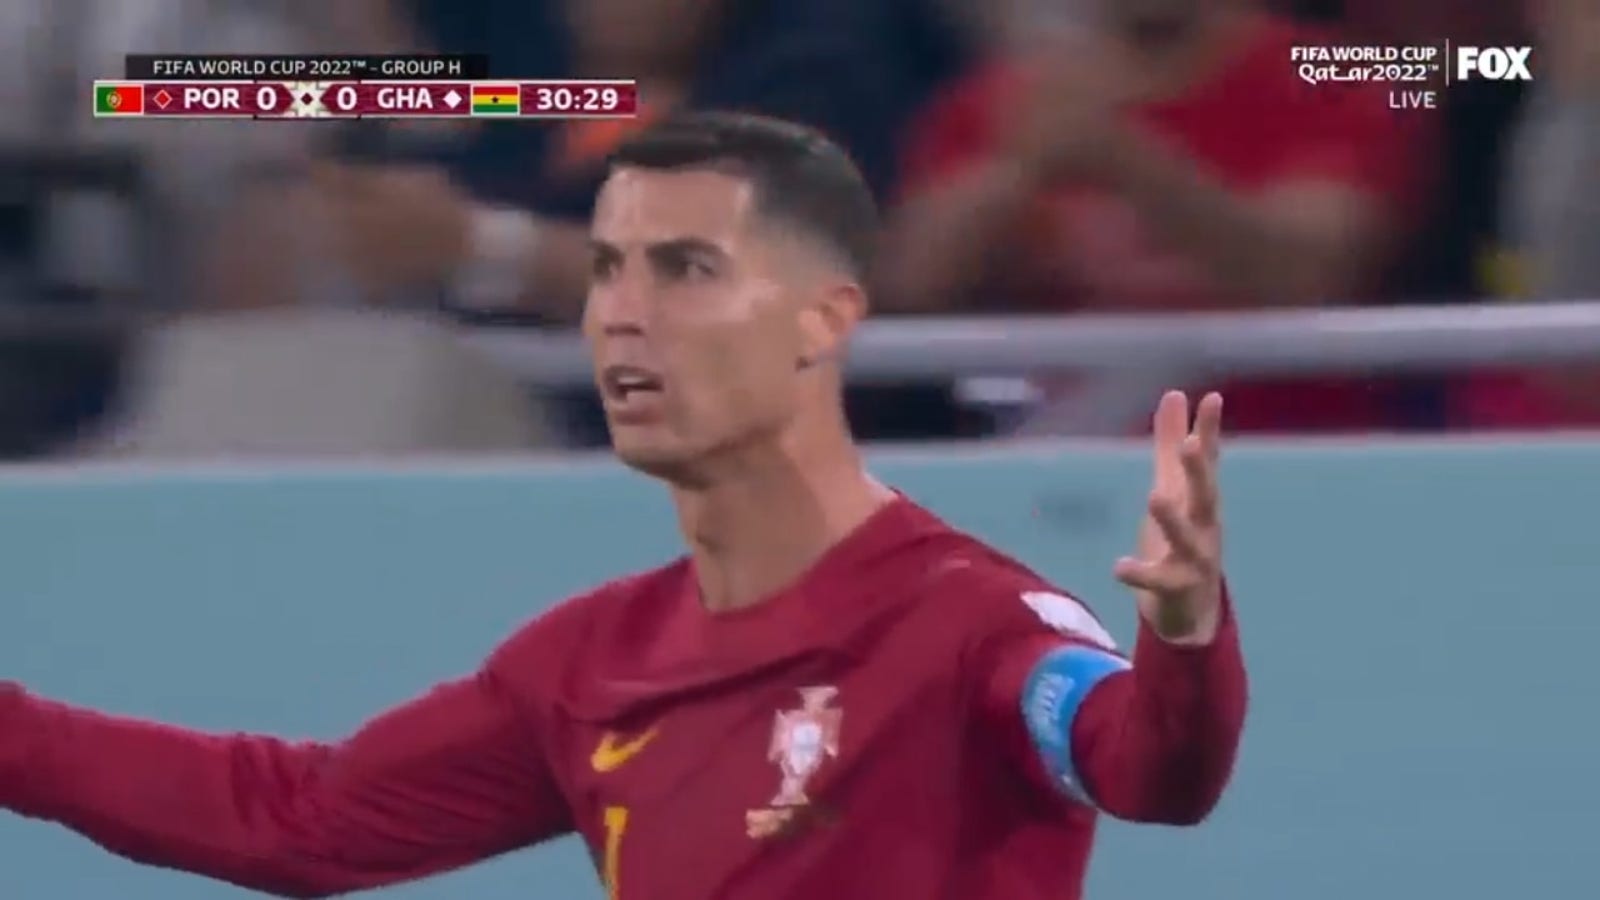 Cristiano Ronaldo's goal against Ghana was overturned by a foul